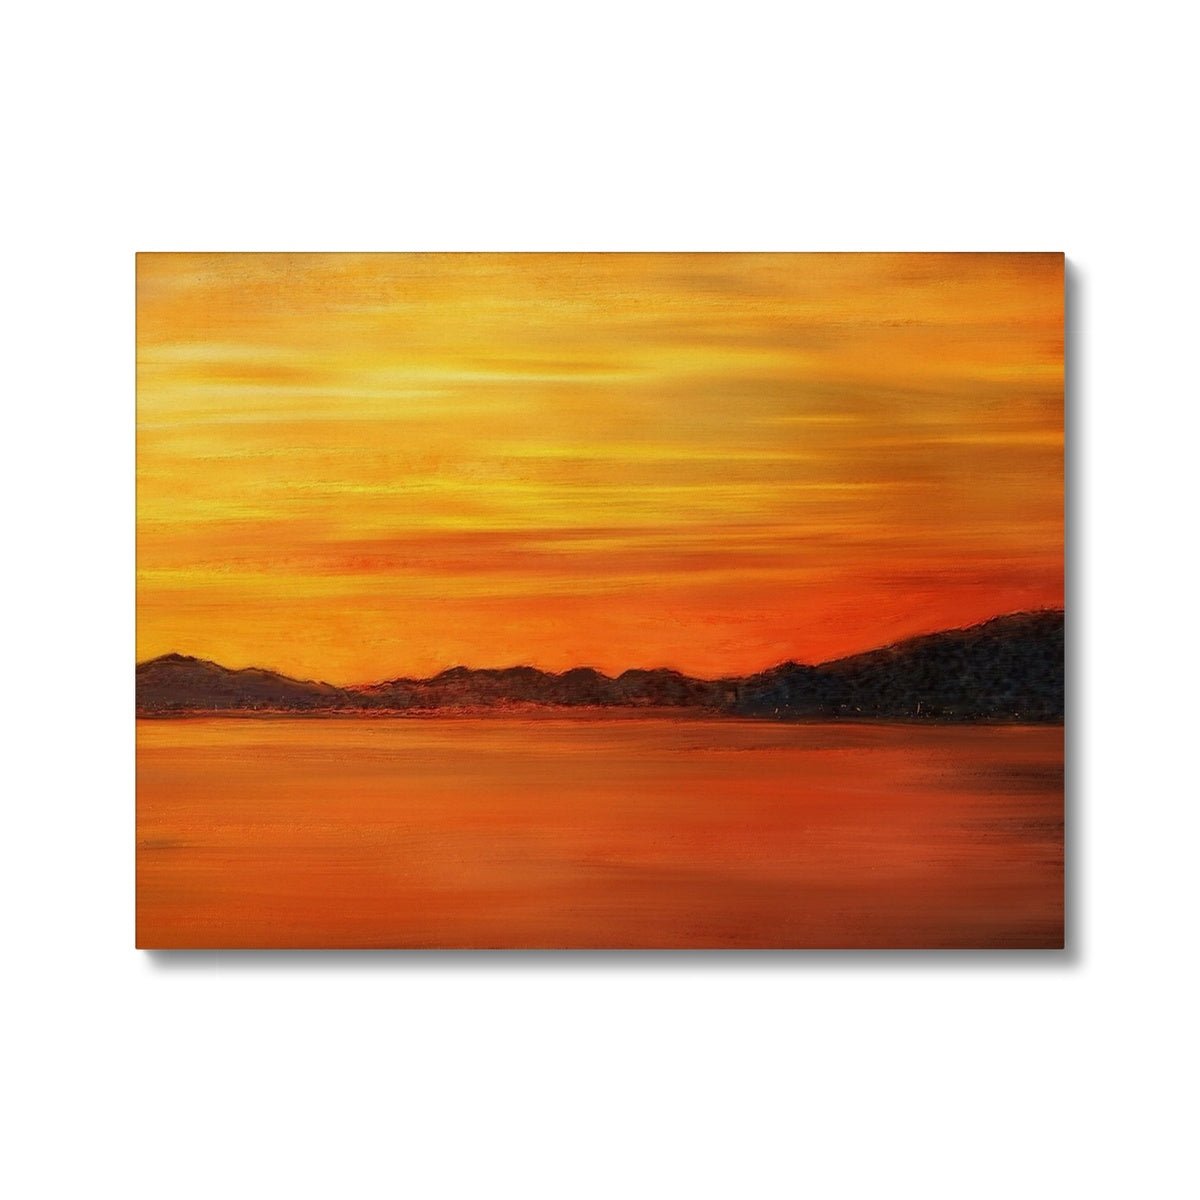 Loch Fyne Sunset Painting | Canvas From Scotland-Contemporary Stretched Canvas Prints-Scottish Lochs & Mountains Art Gallery-24"x18"-Paintings, Prints, Homeware, Art Gifts From Scotland By Scottish Artist Kevin Hunter